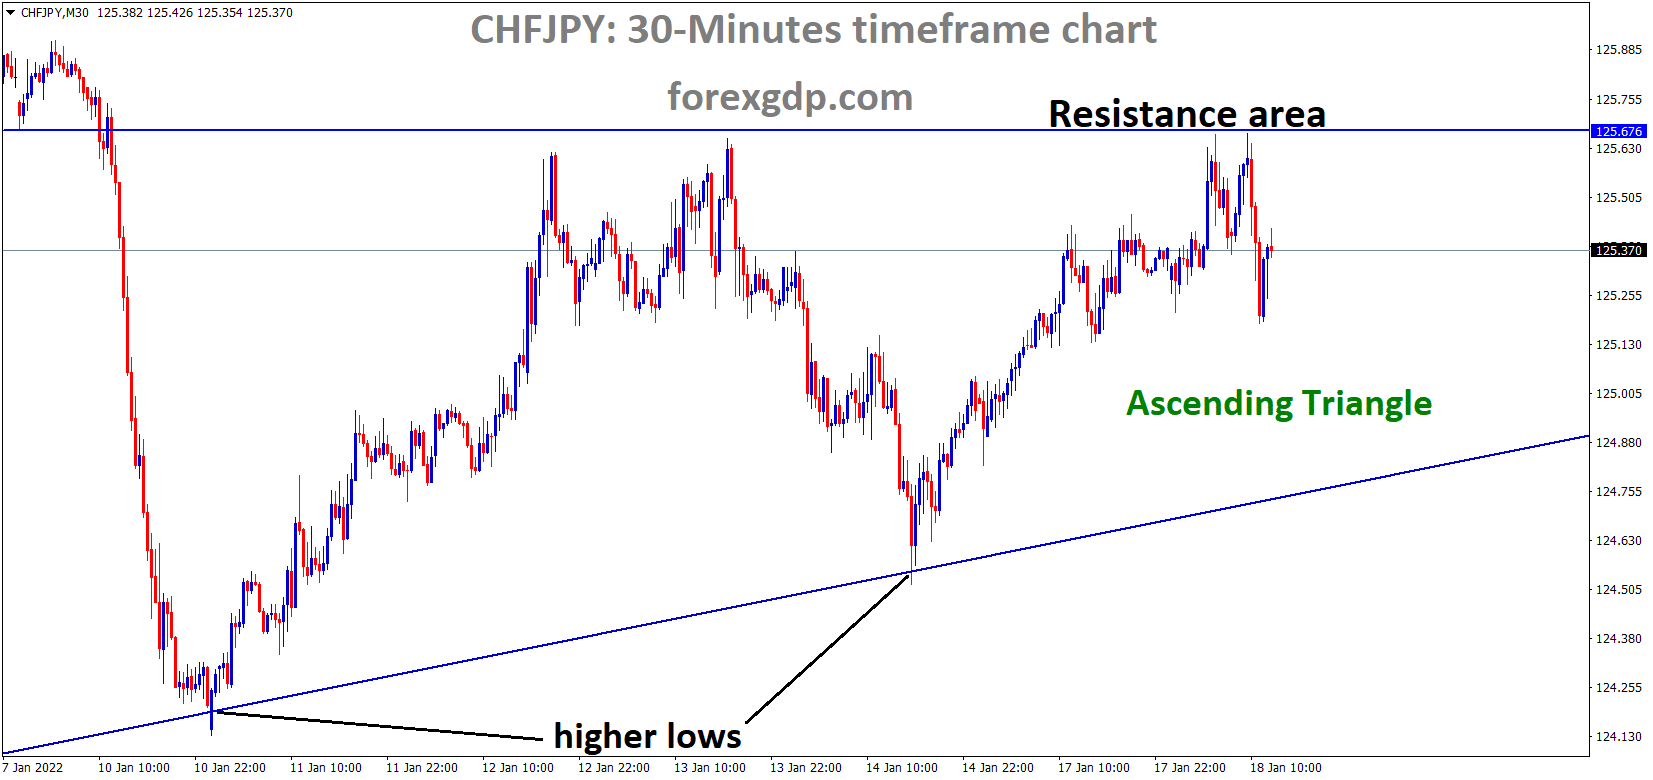 CHFJPY is moving in an ascending triangle pattern and the market has fallen from the Horizontal resistance area of the pattern